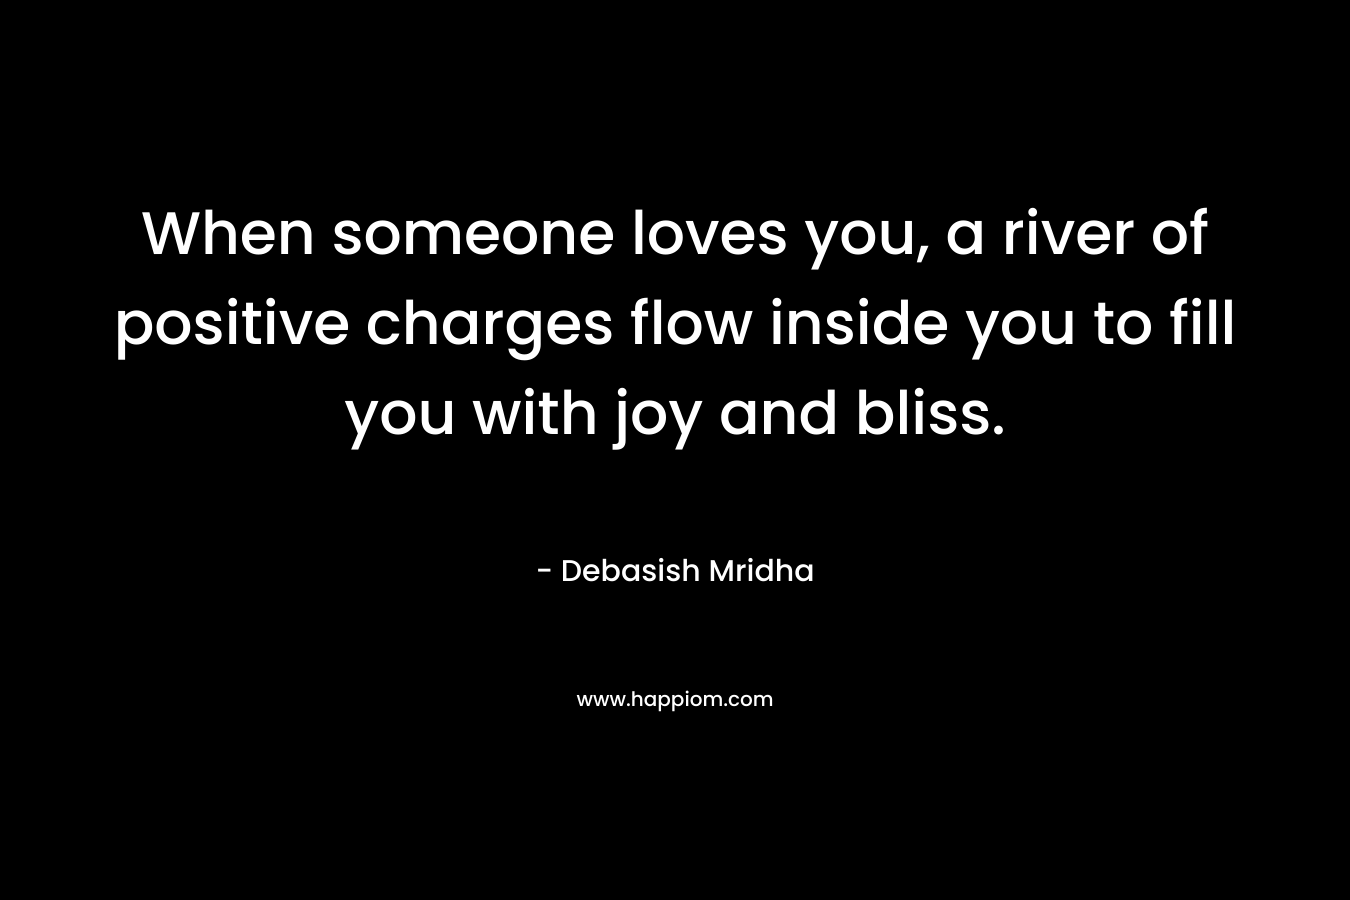 When someone loves you, a river of positive charges flow inside you to fill you with joy and bliss. – Debasish Mridha